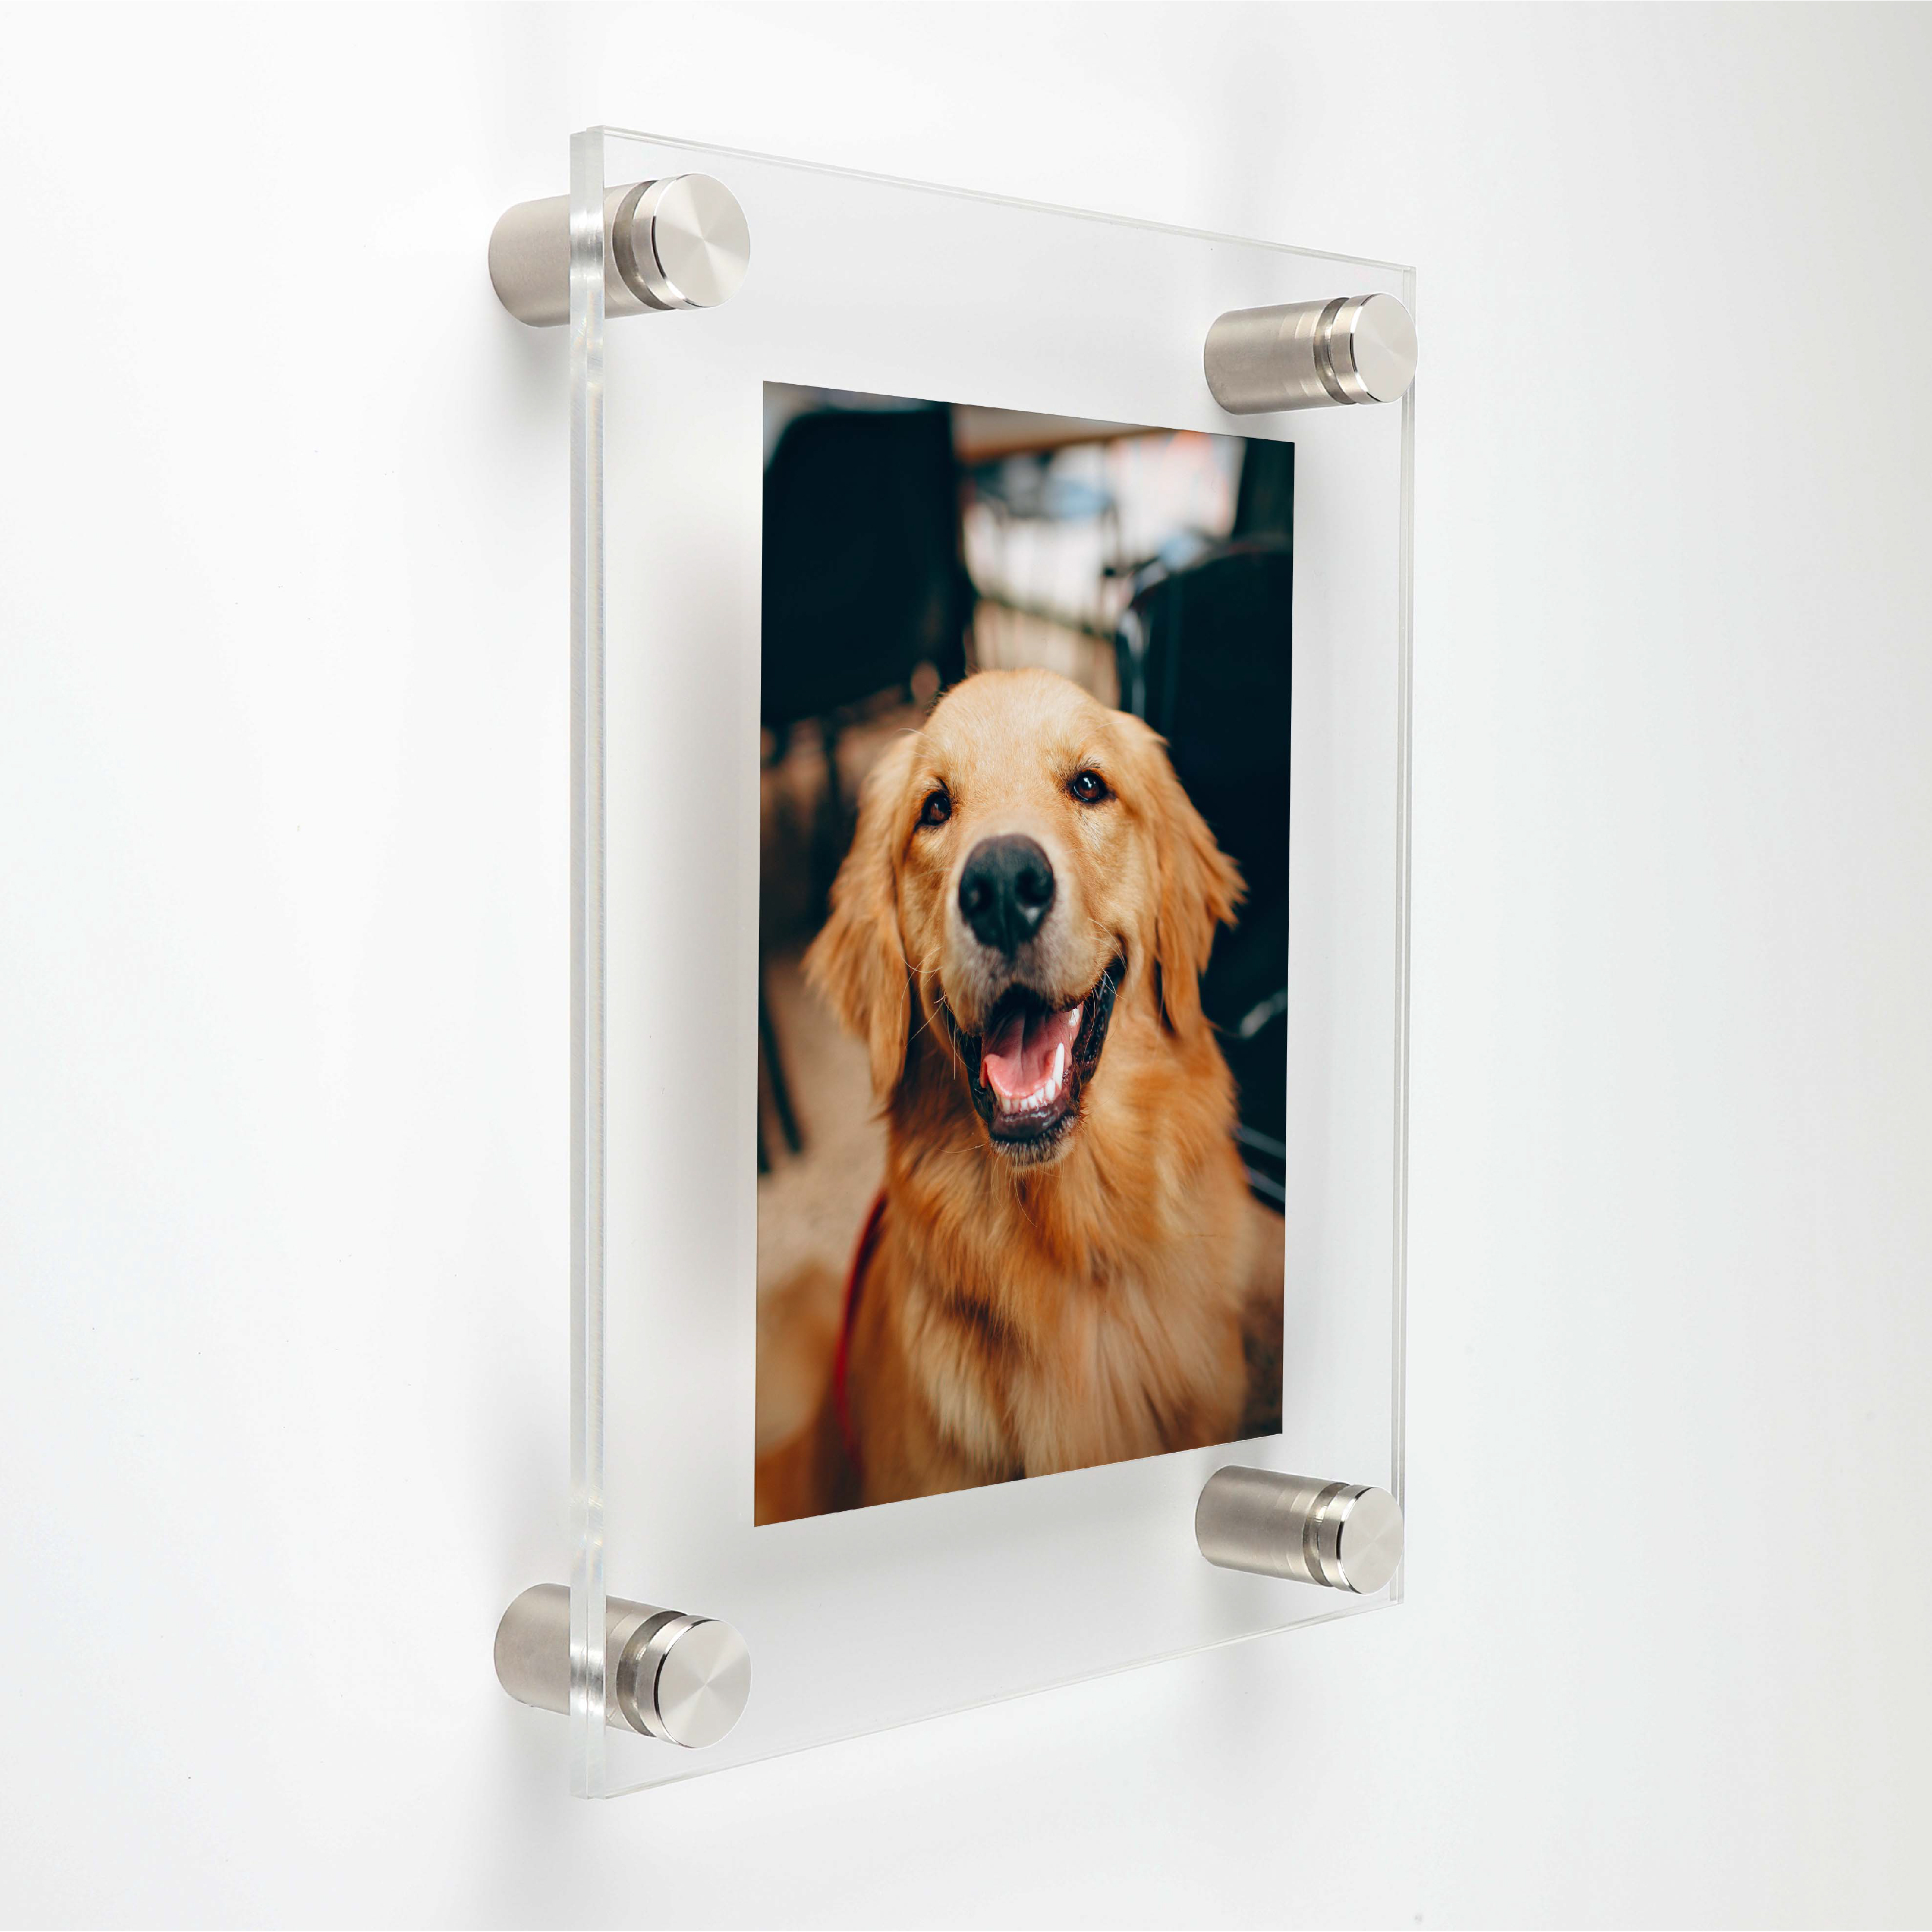 (2) 19-3/4'' x 26'' Clear Acrylics , Pre-Drilled With Polished Edges (Thick 3/16'' each), Wall Frame with (4) 3/4'' x 1'' Brushed Stainless Steel Standoffs includes Screws and Anchors